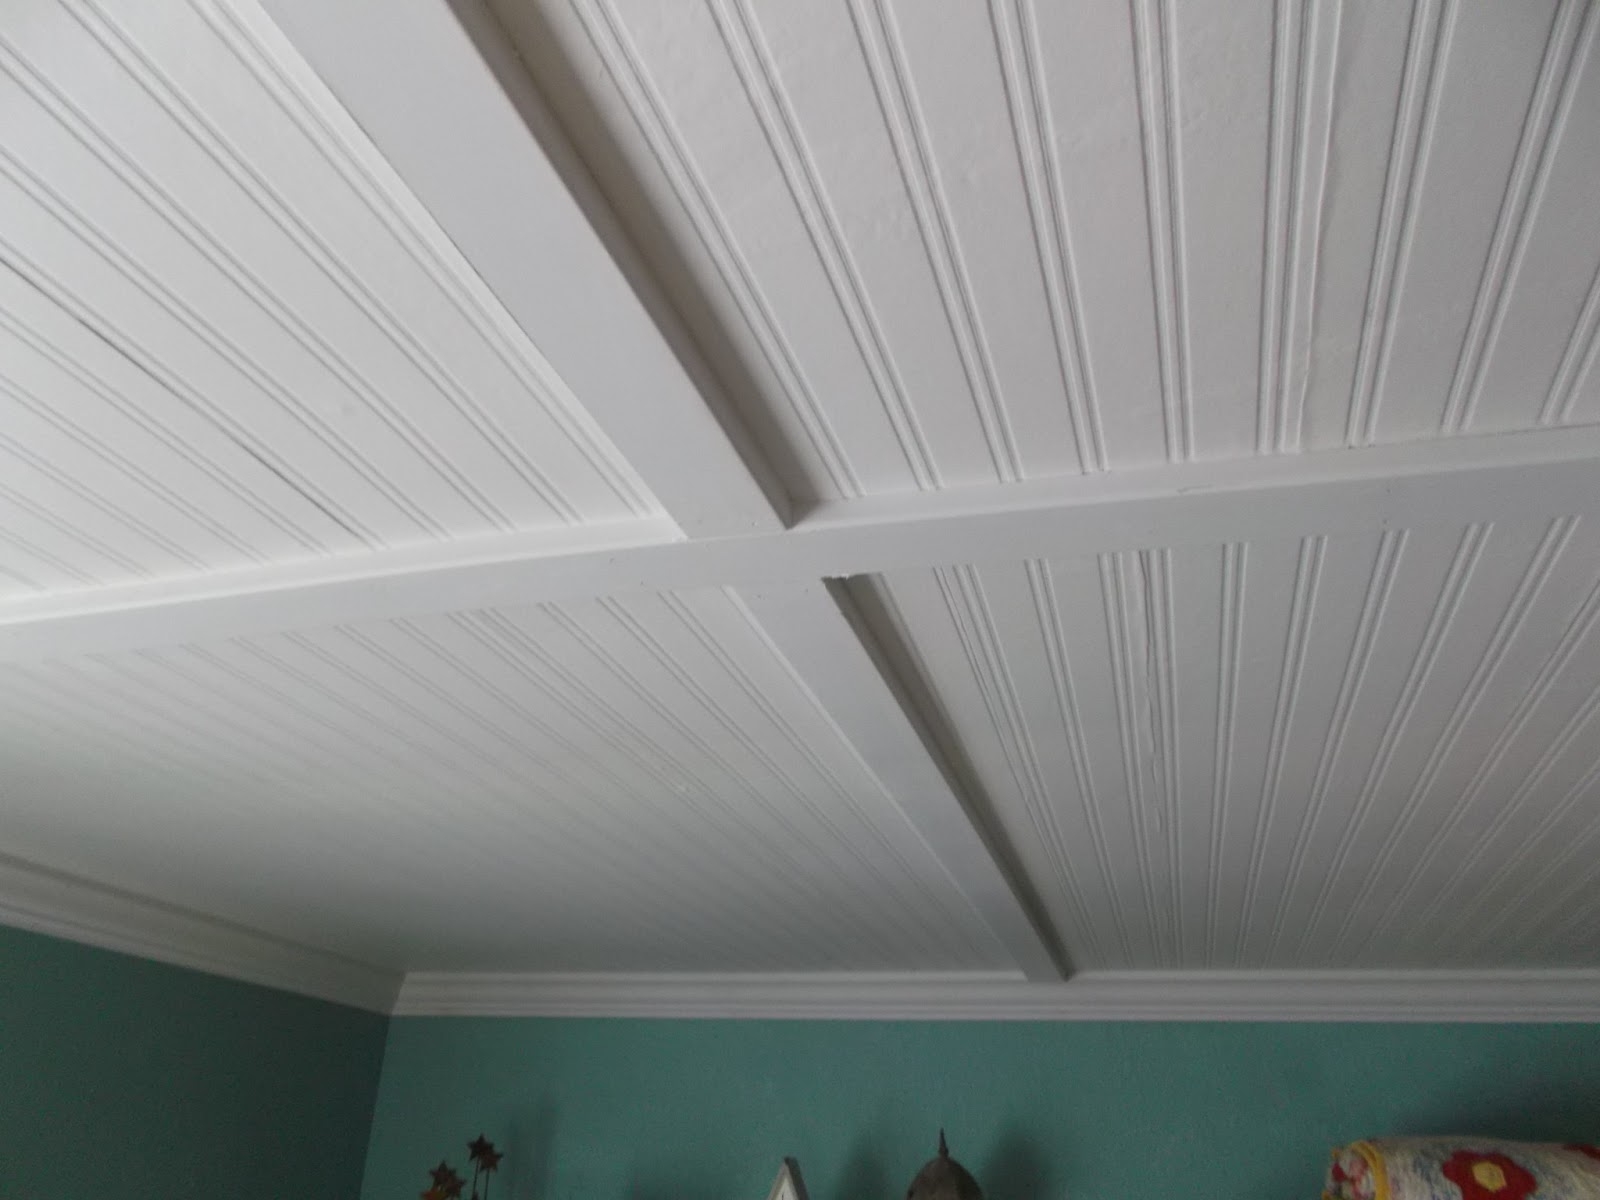 Wallpaper Over Ceiling Tiles Wallpaper Over Ceiling Tiles living a cottage life beadboard ceiling 1600 X 1200